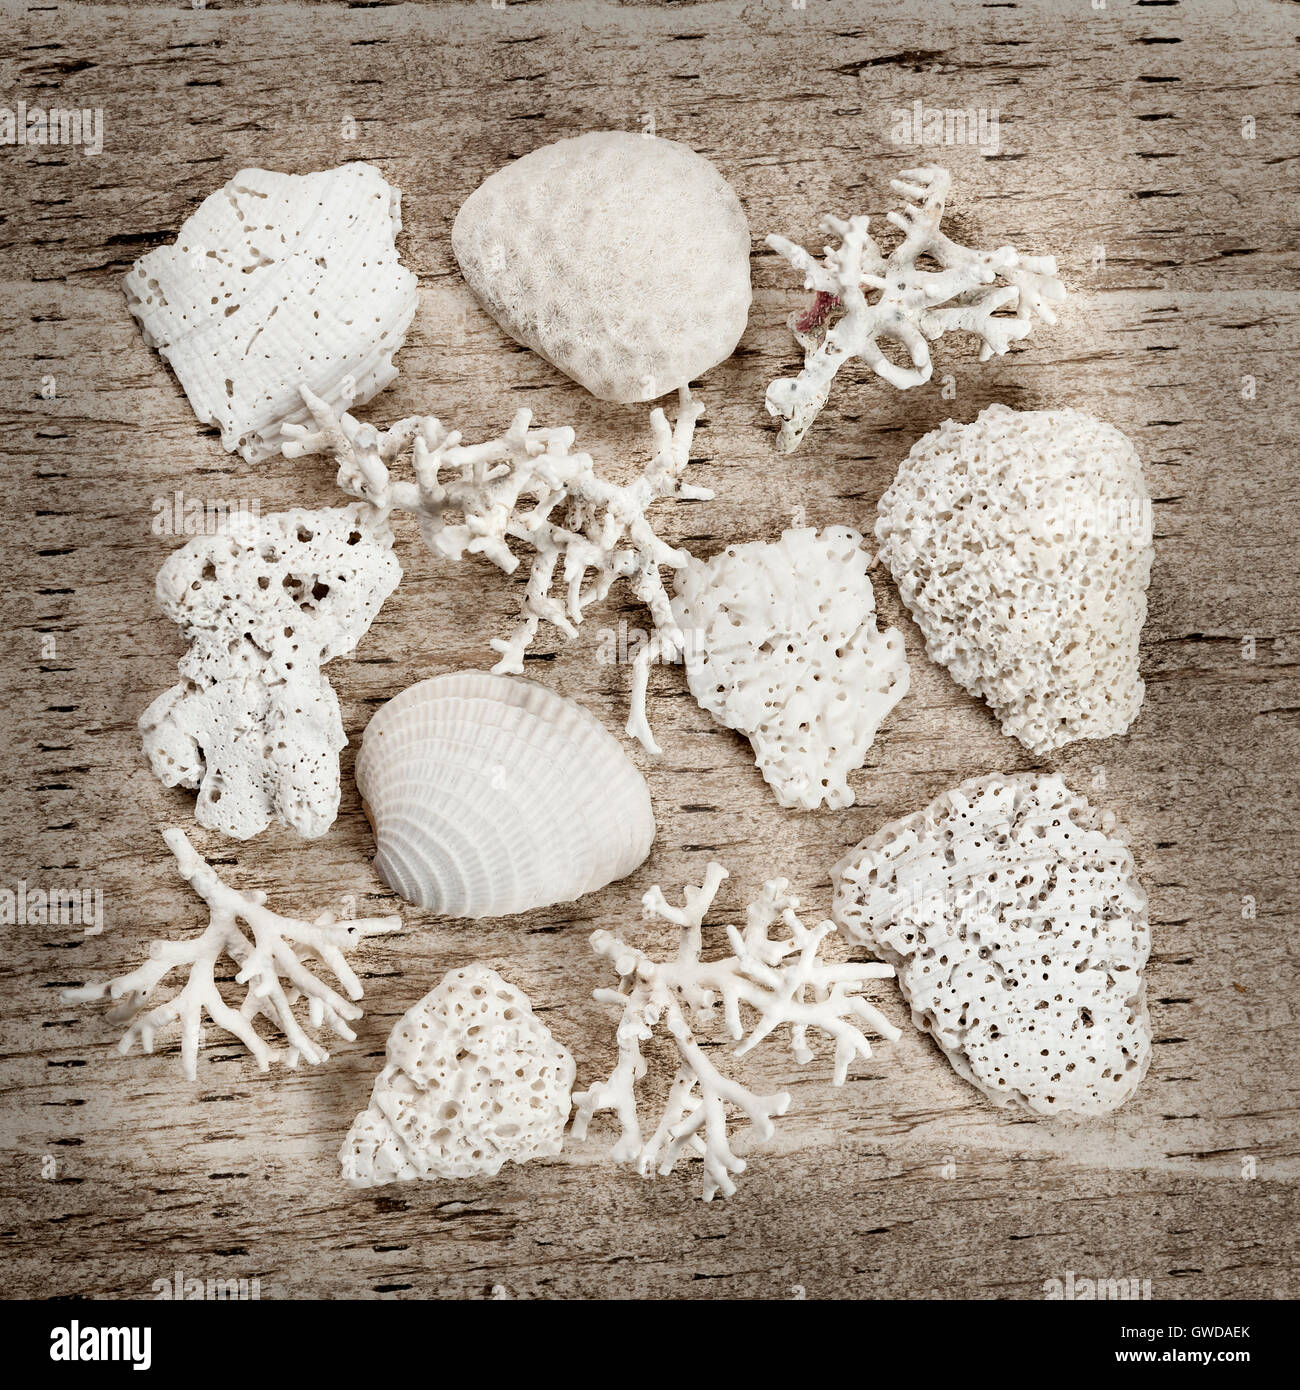 Sun bleached pieces of corals and shells found on a beach arranged on rustic wood background Stock Photo